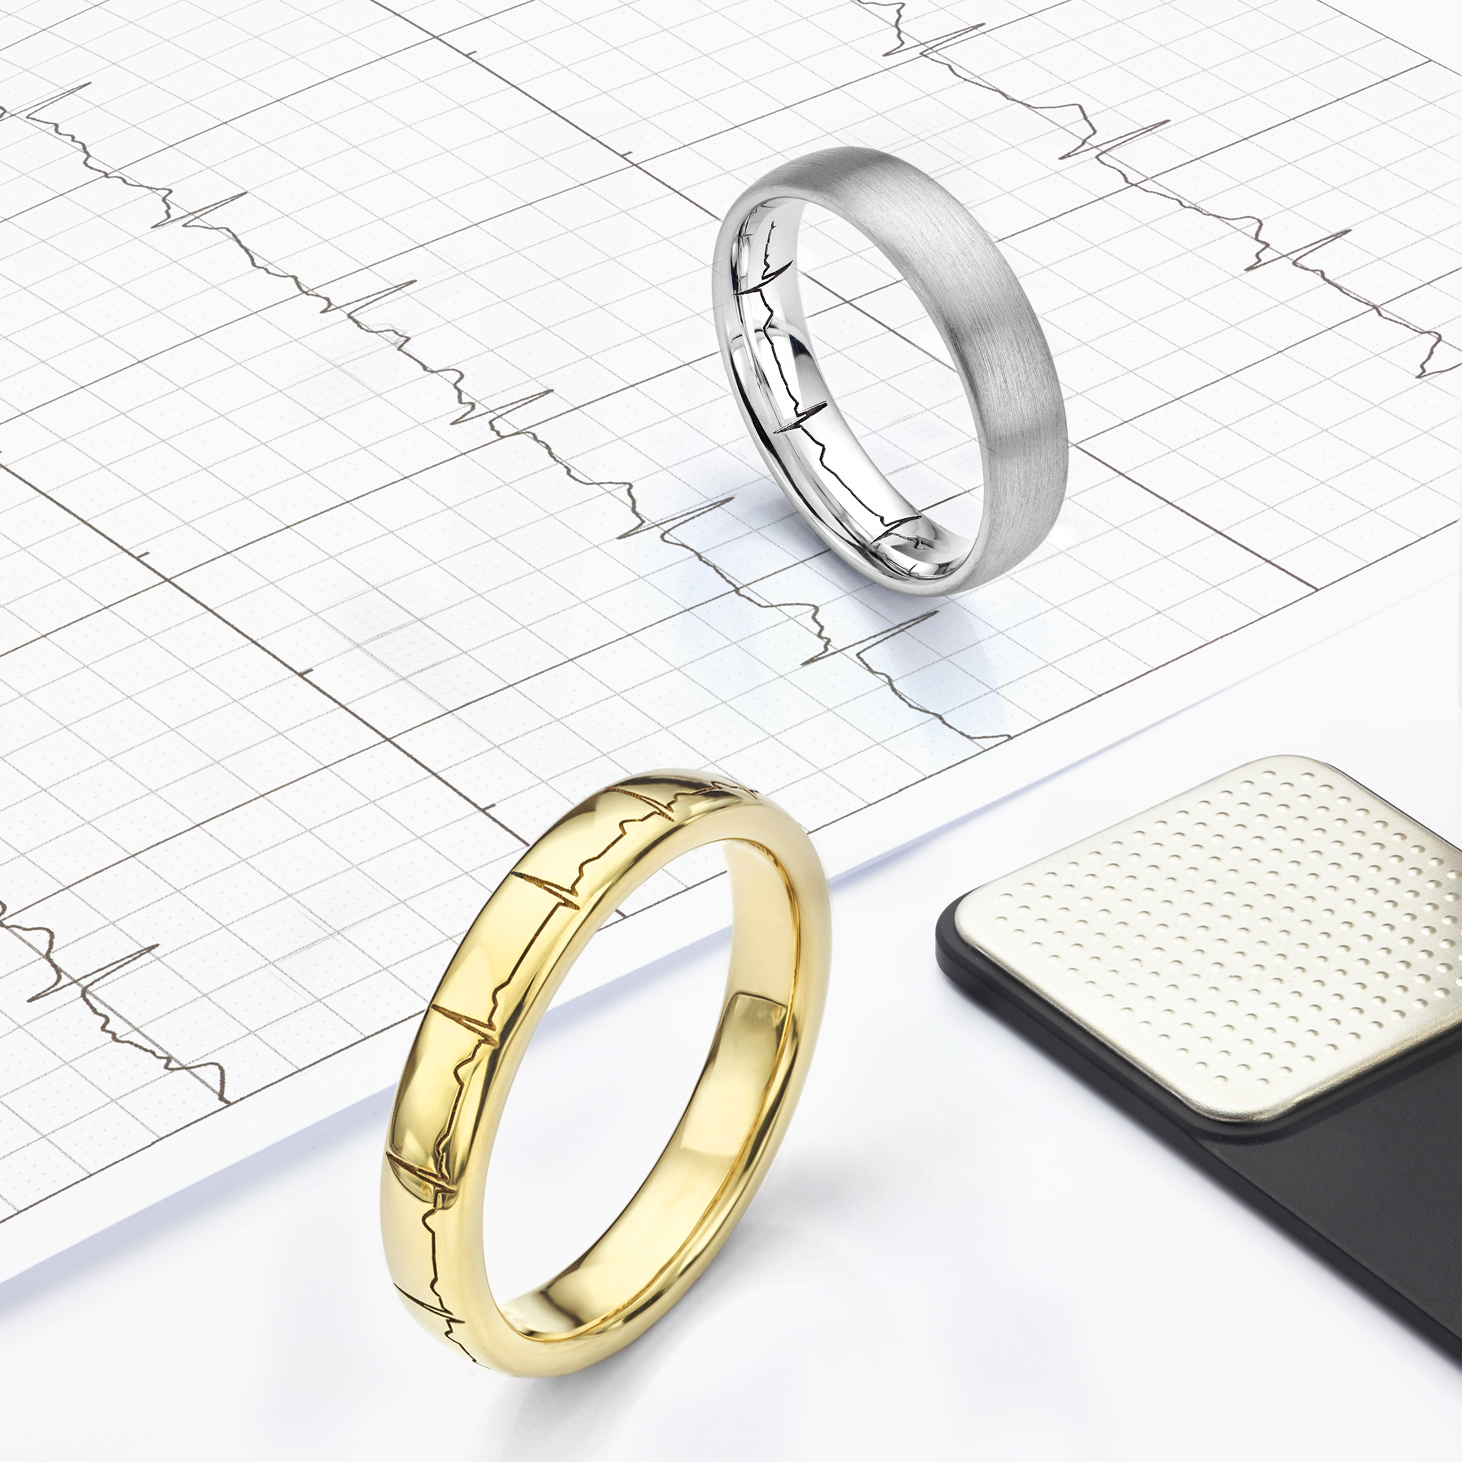 When to order your wedding rings, showing heartbeat rings taking around 5-6 weeks to create